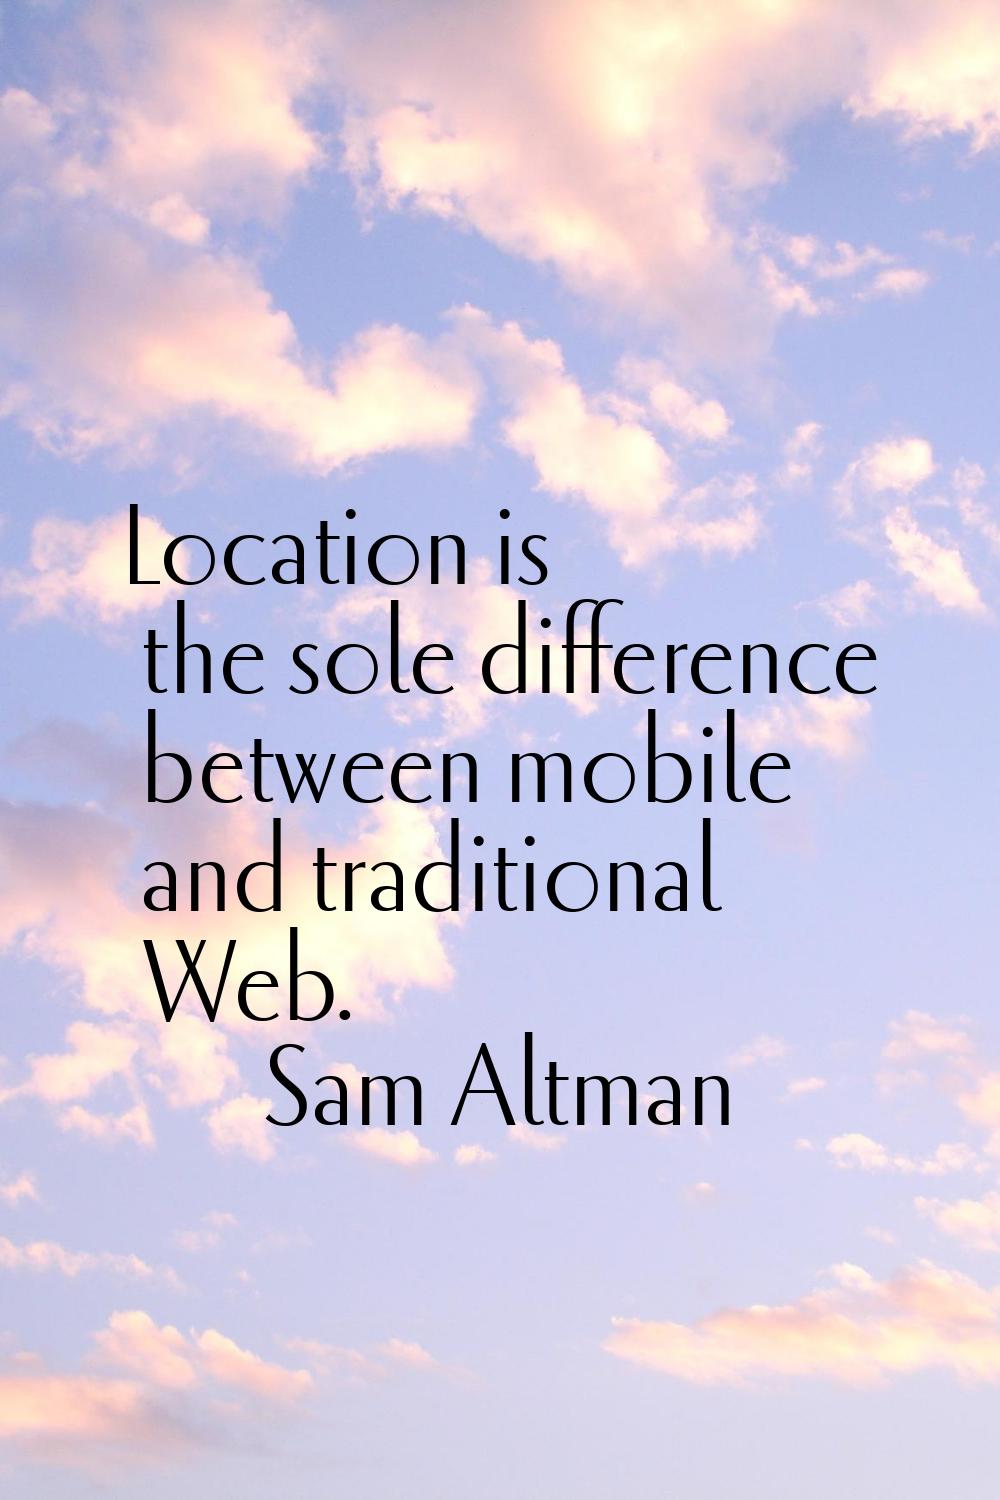 Location is the sole difference between mobile and traditional Web.